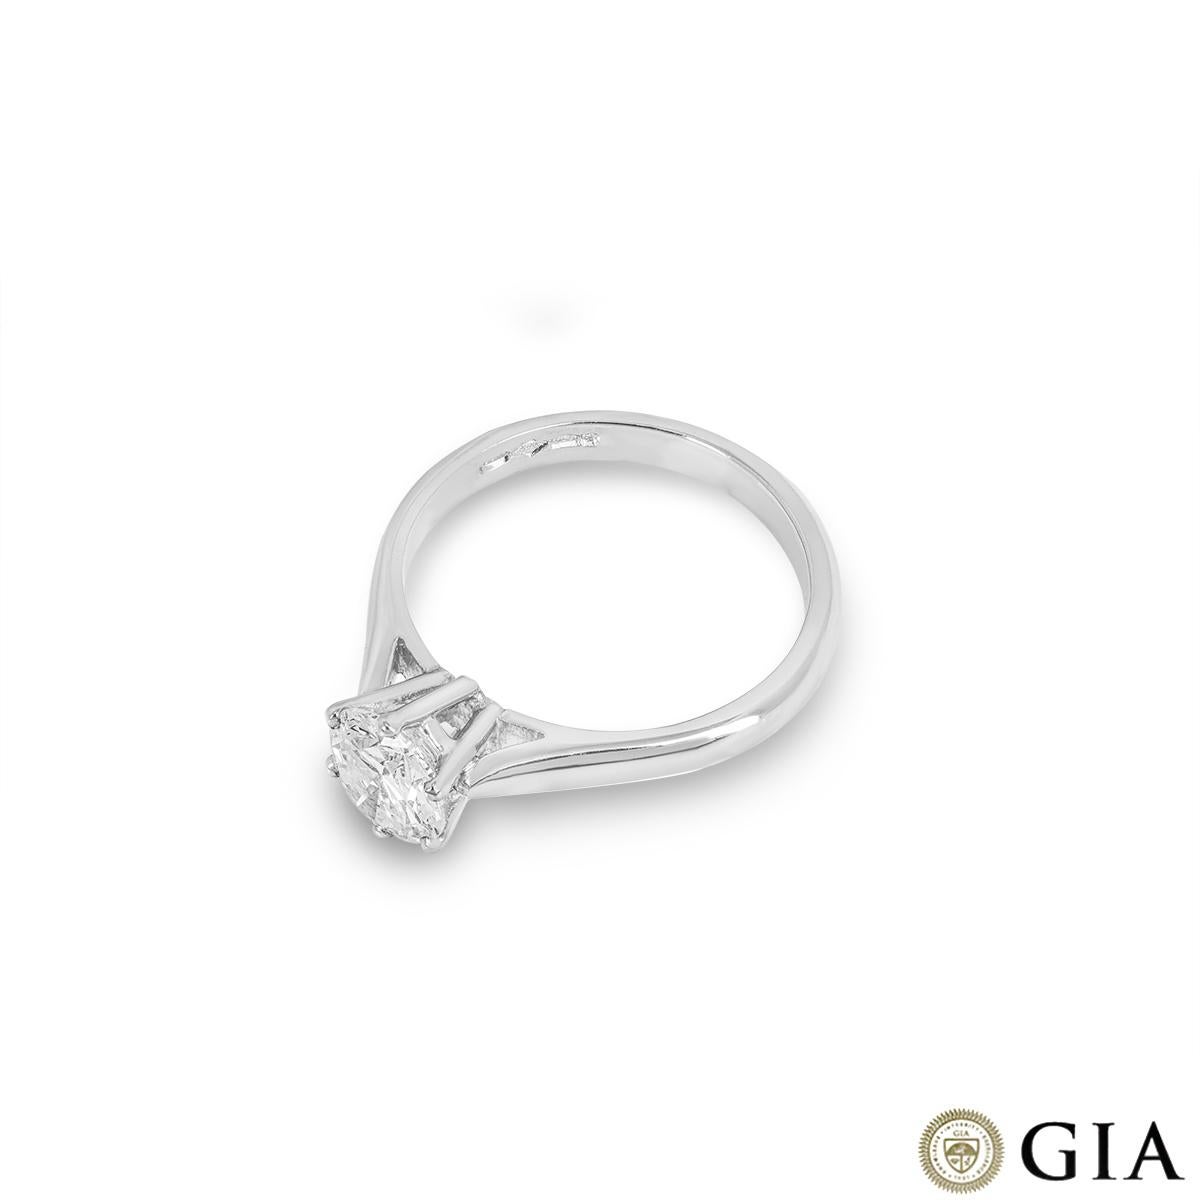 GIA Certified Platinum Round Brilliant Cut Diamond Ring 1.00ct D/IF In Excellent Condition For Sale In London, GB